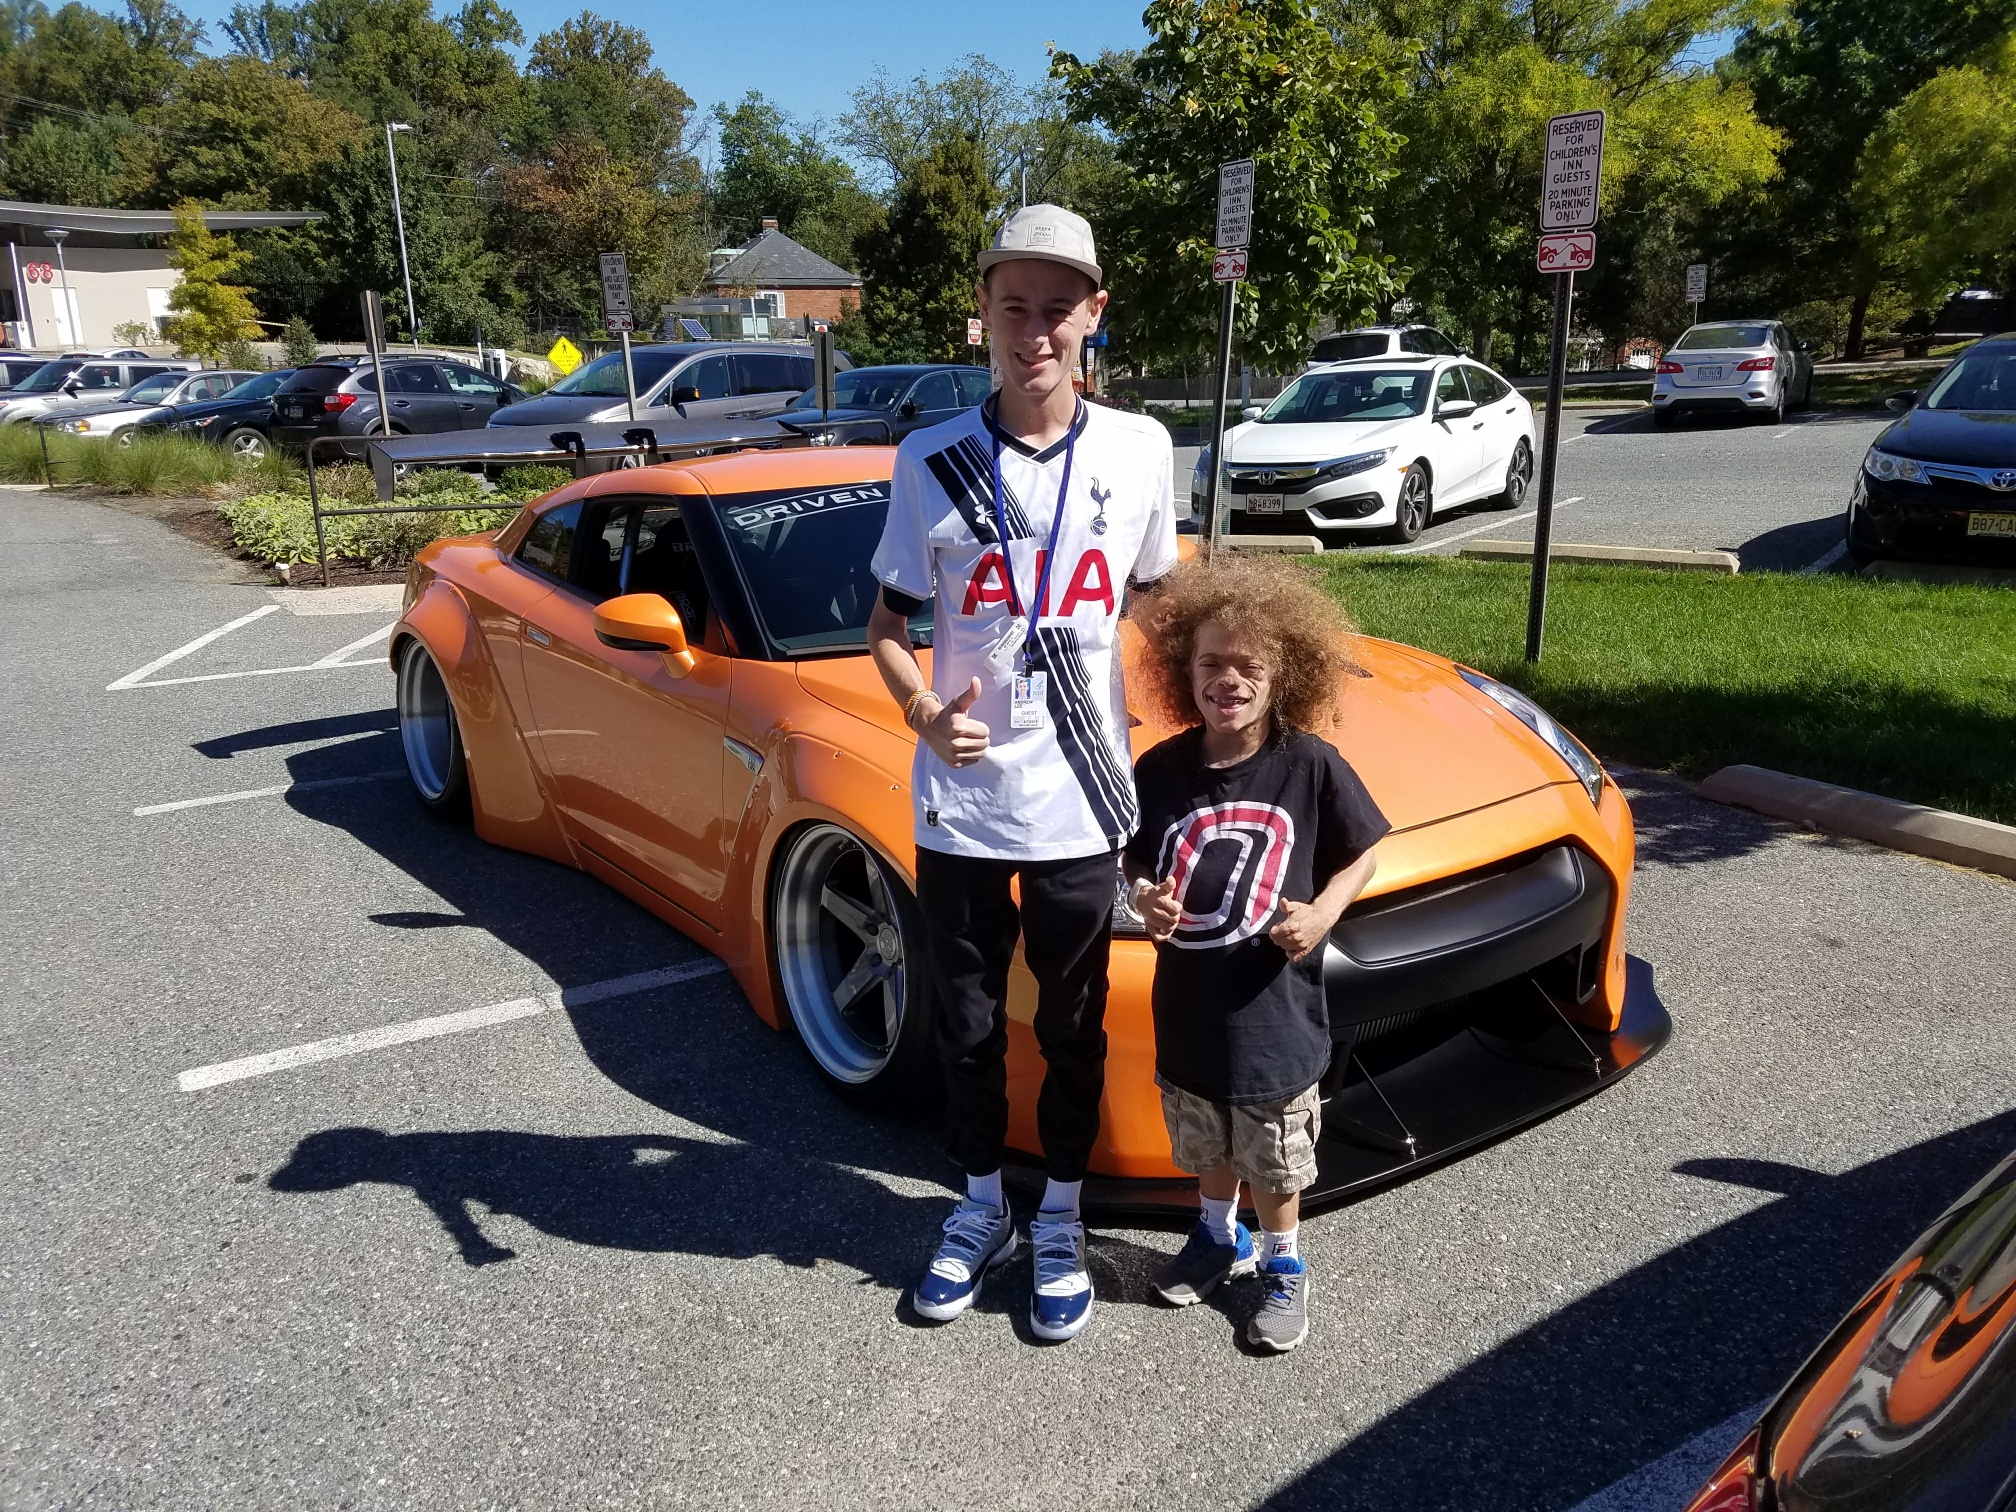 Isaac and Andrew at the car show